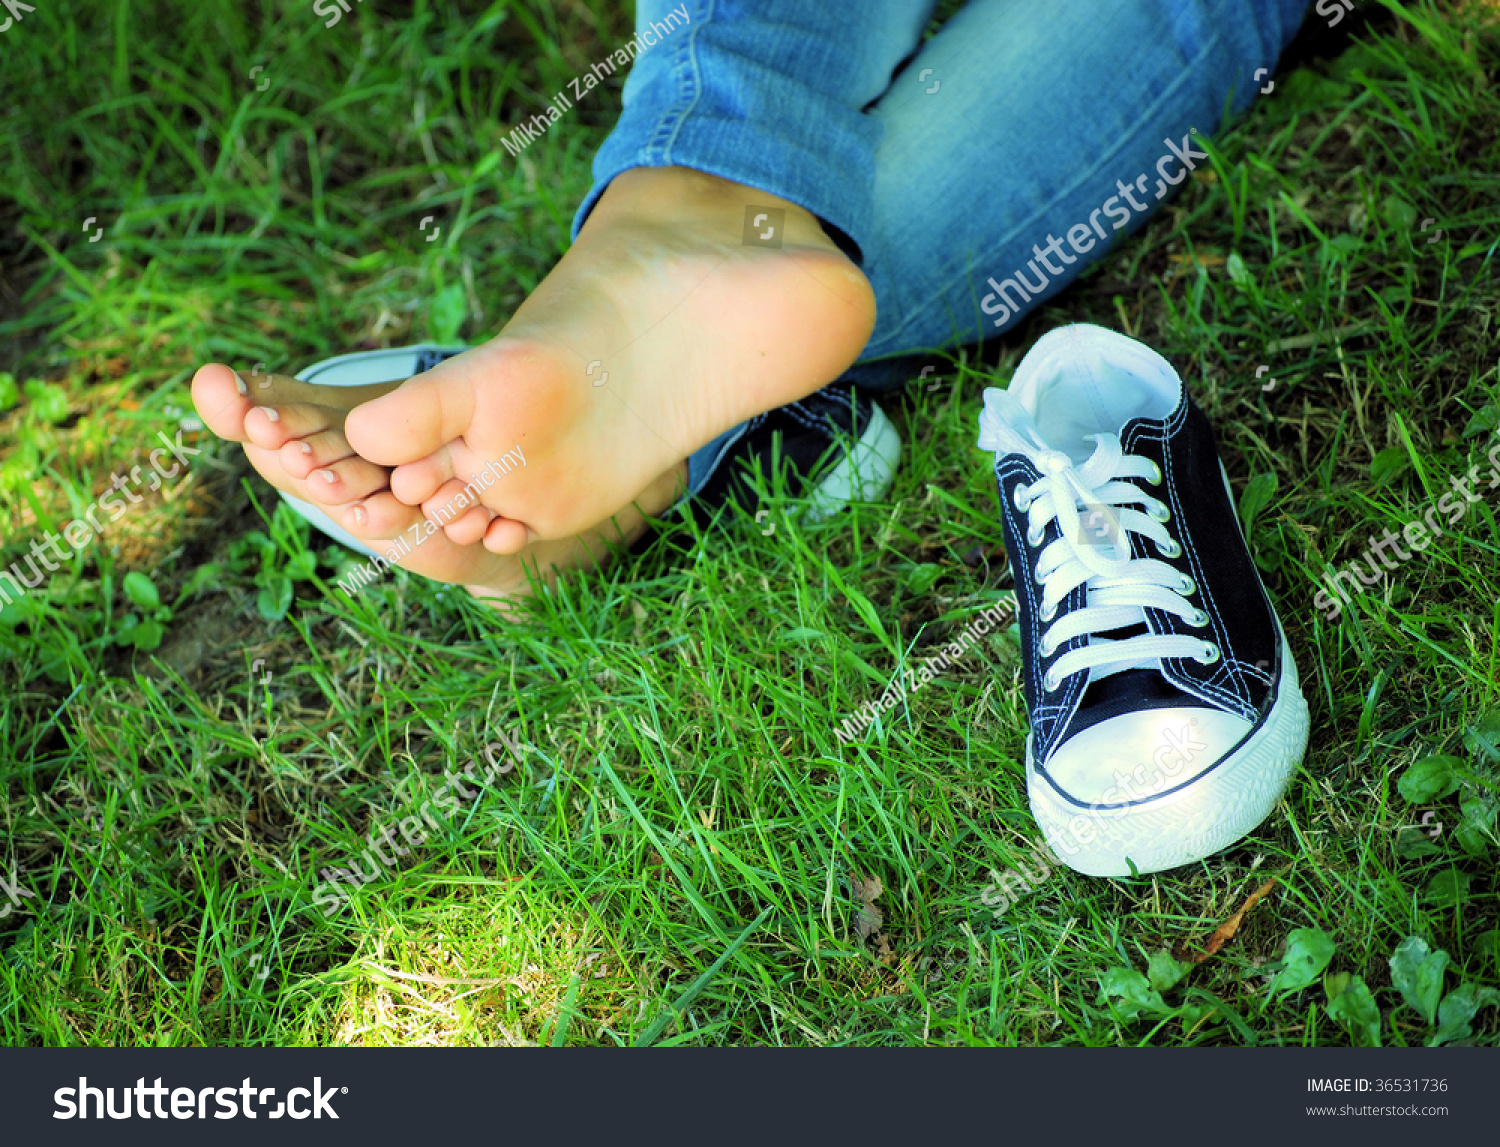 Feet Girl Teenager Gym Shoes On Stock Photo 36531736 - Shutterstock